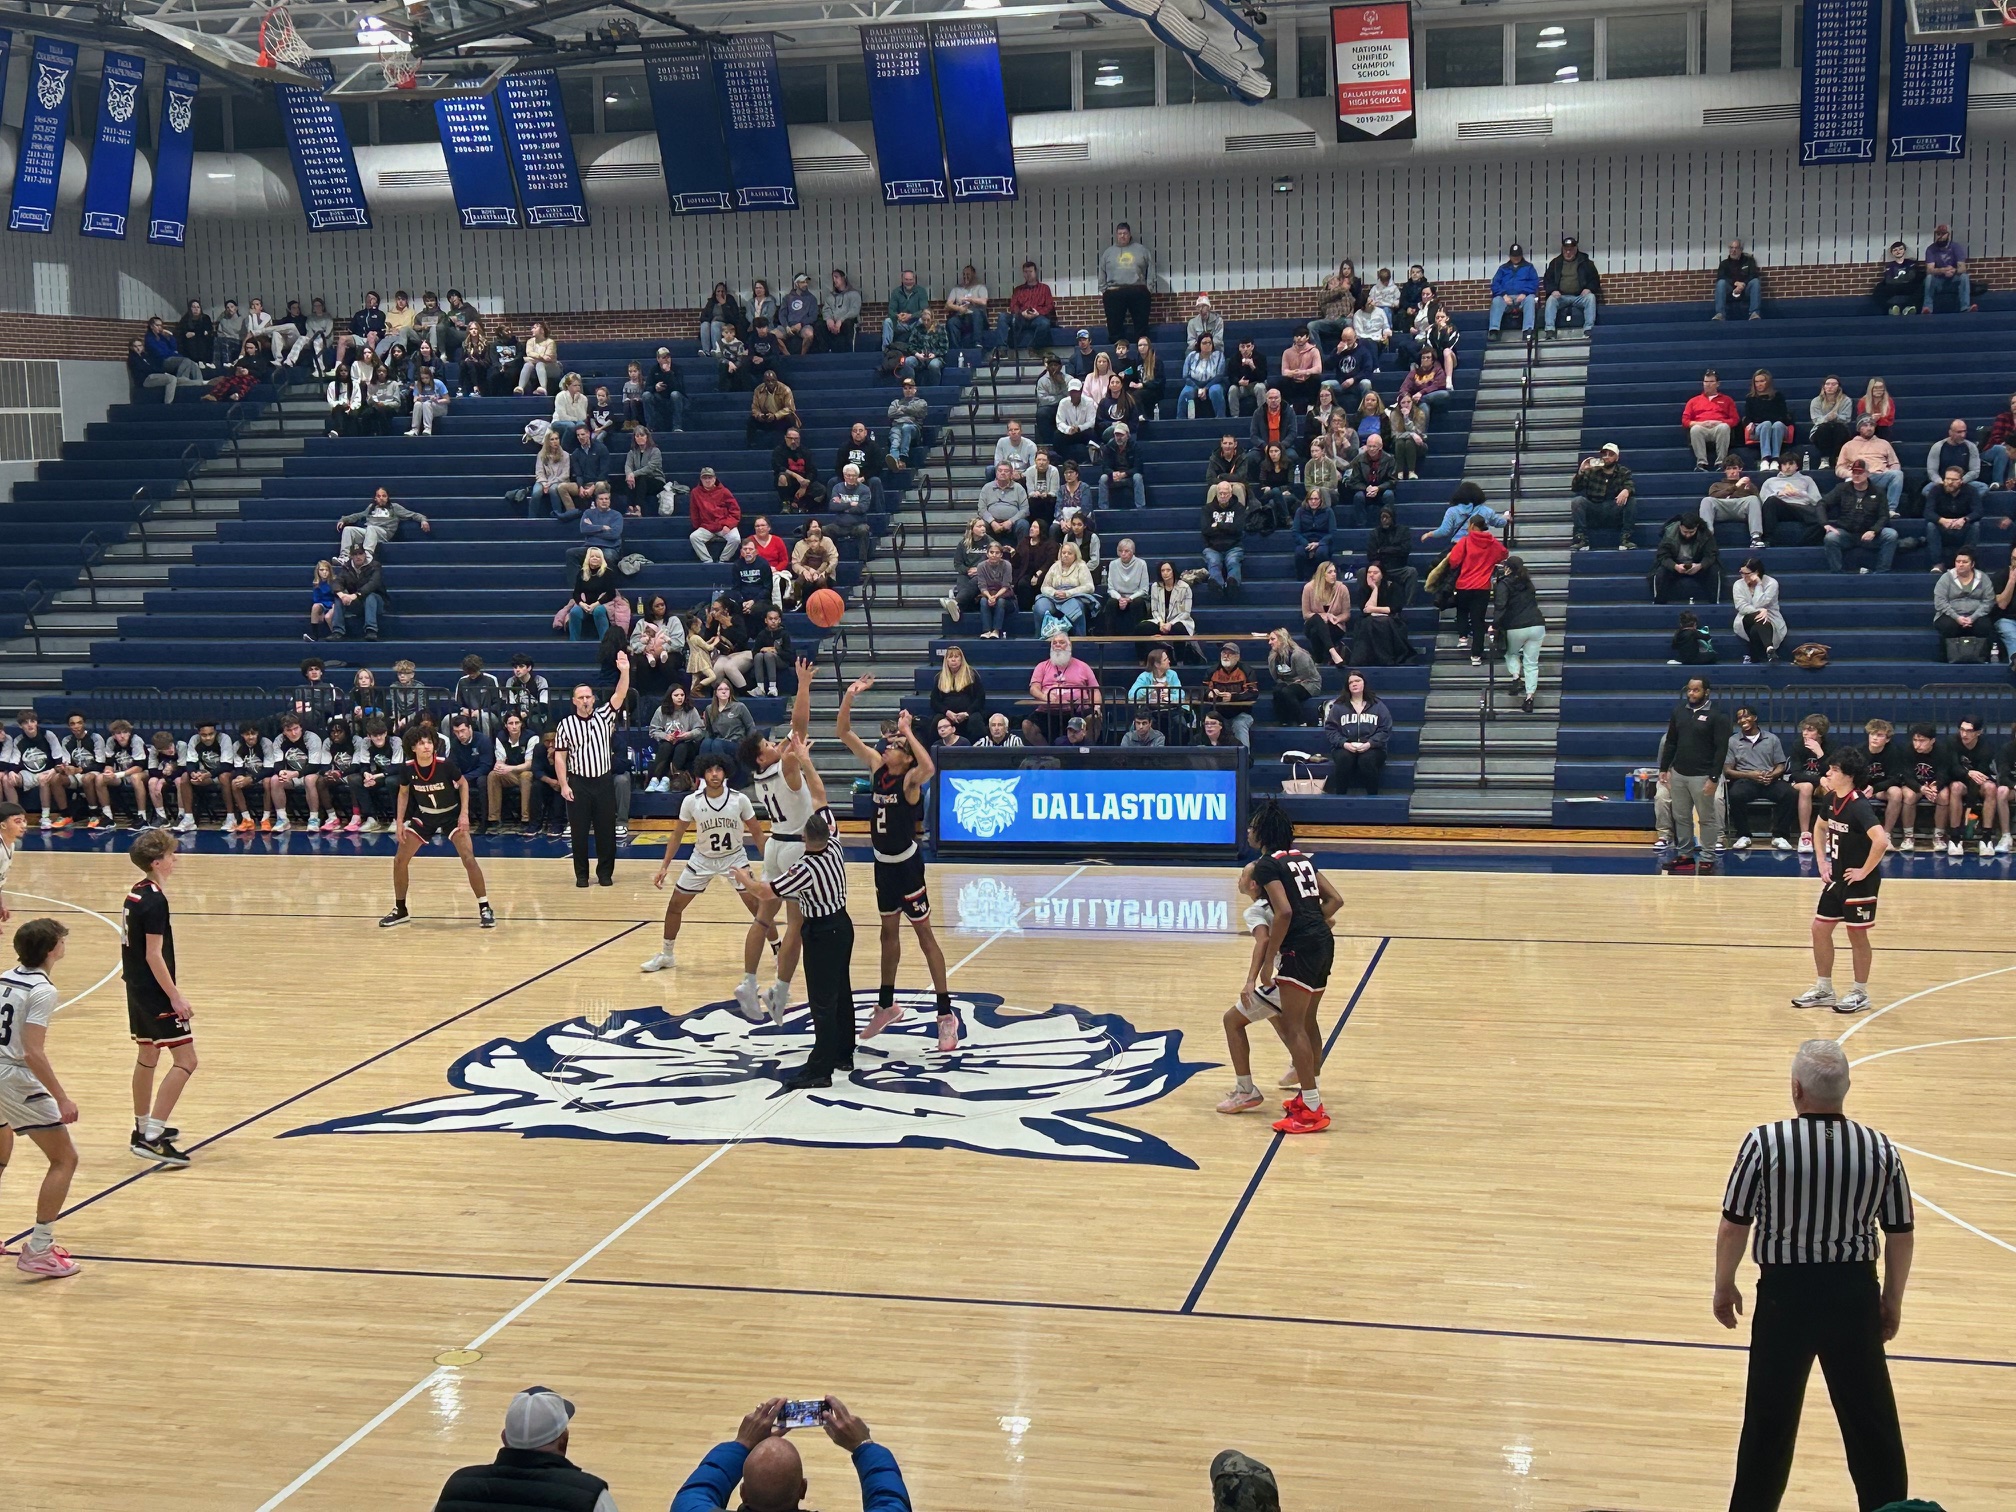 Dallastown Continues Winning Ways As Wildcats Shoot Past South Western, Remain Surrounded By A Bevy Of L-L 6A Squads In District Playoff Chase As Potential ‘Playoff Prep’ Game Against Penn Manor Looms On Saturday